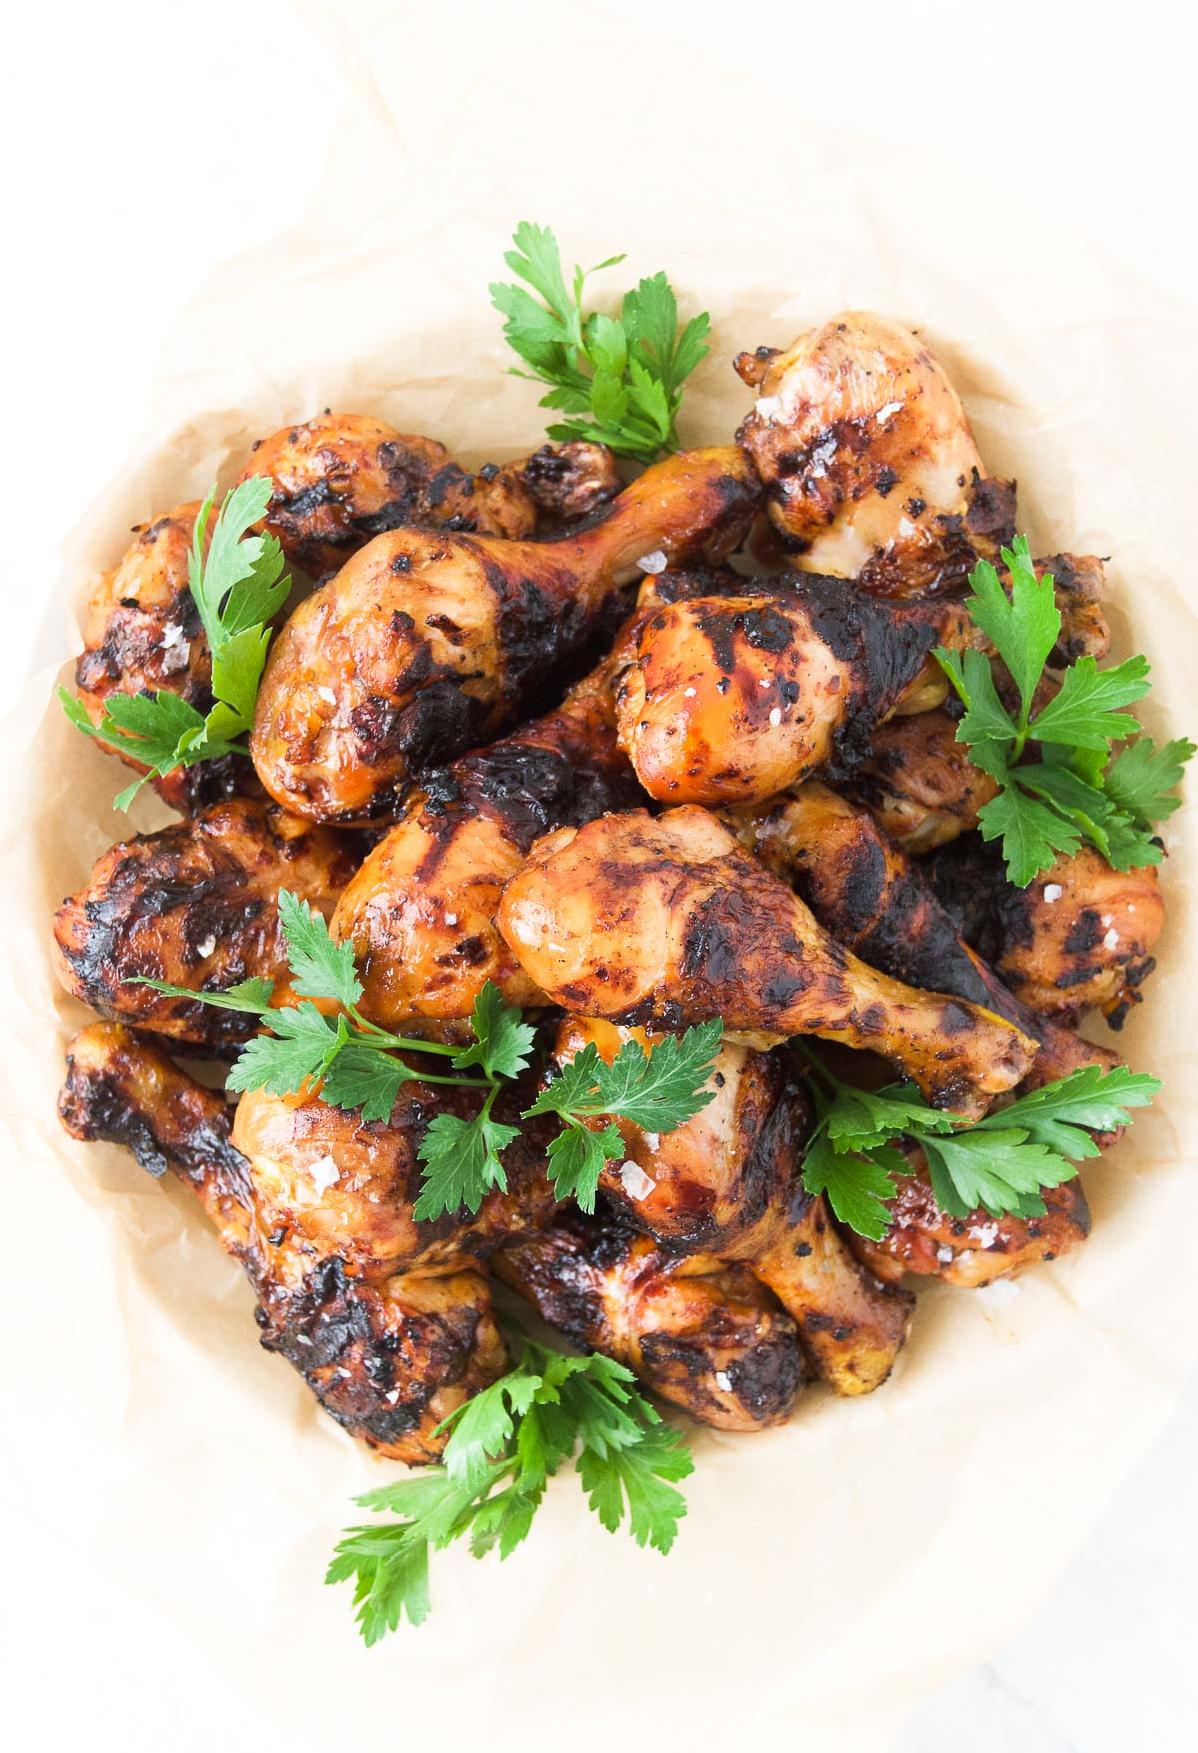  This juicy chicken is marinated in Brazilian beer, giving it a delicious twist.